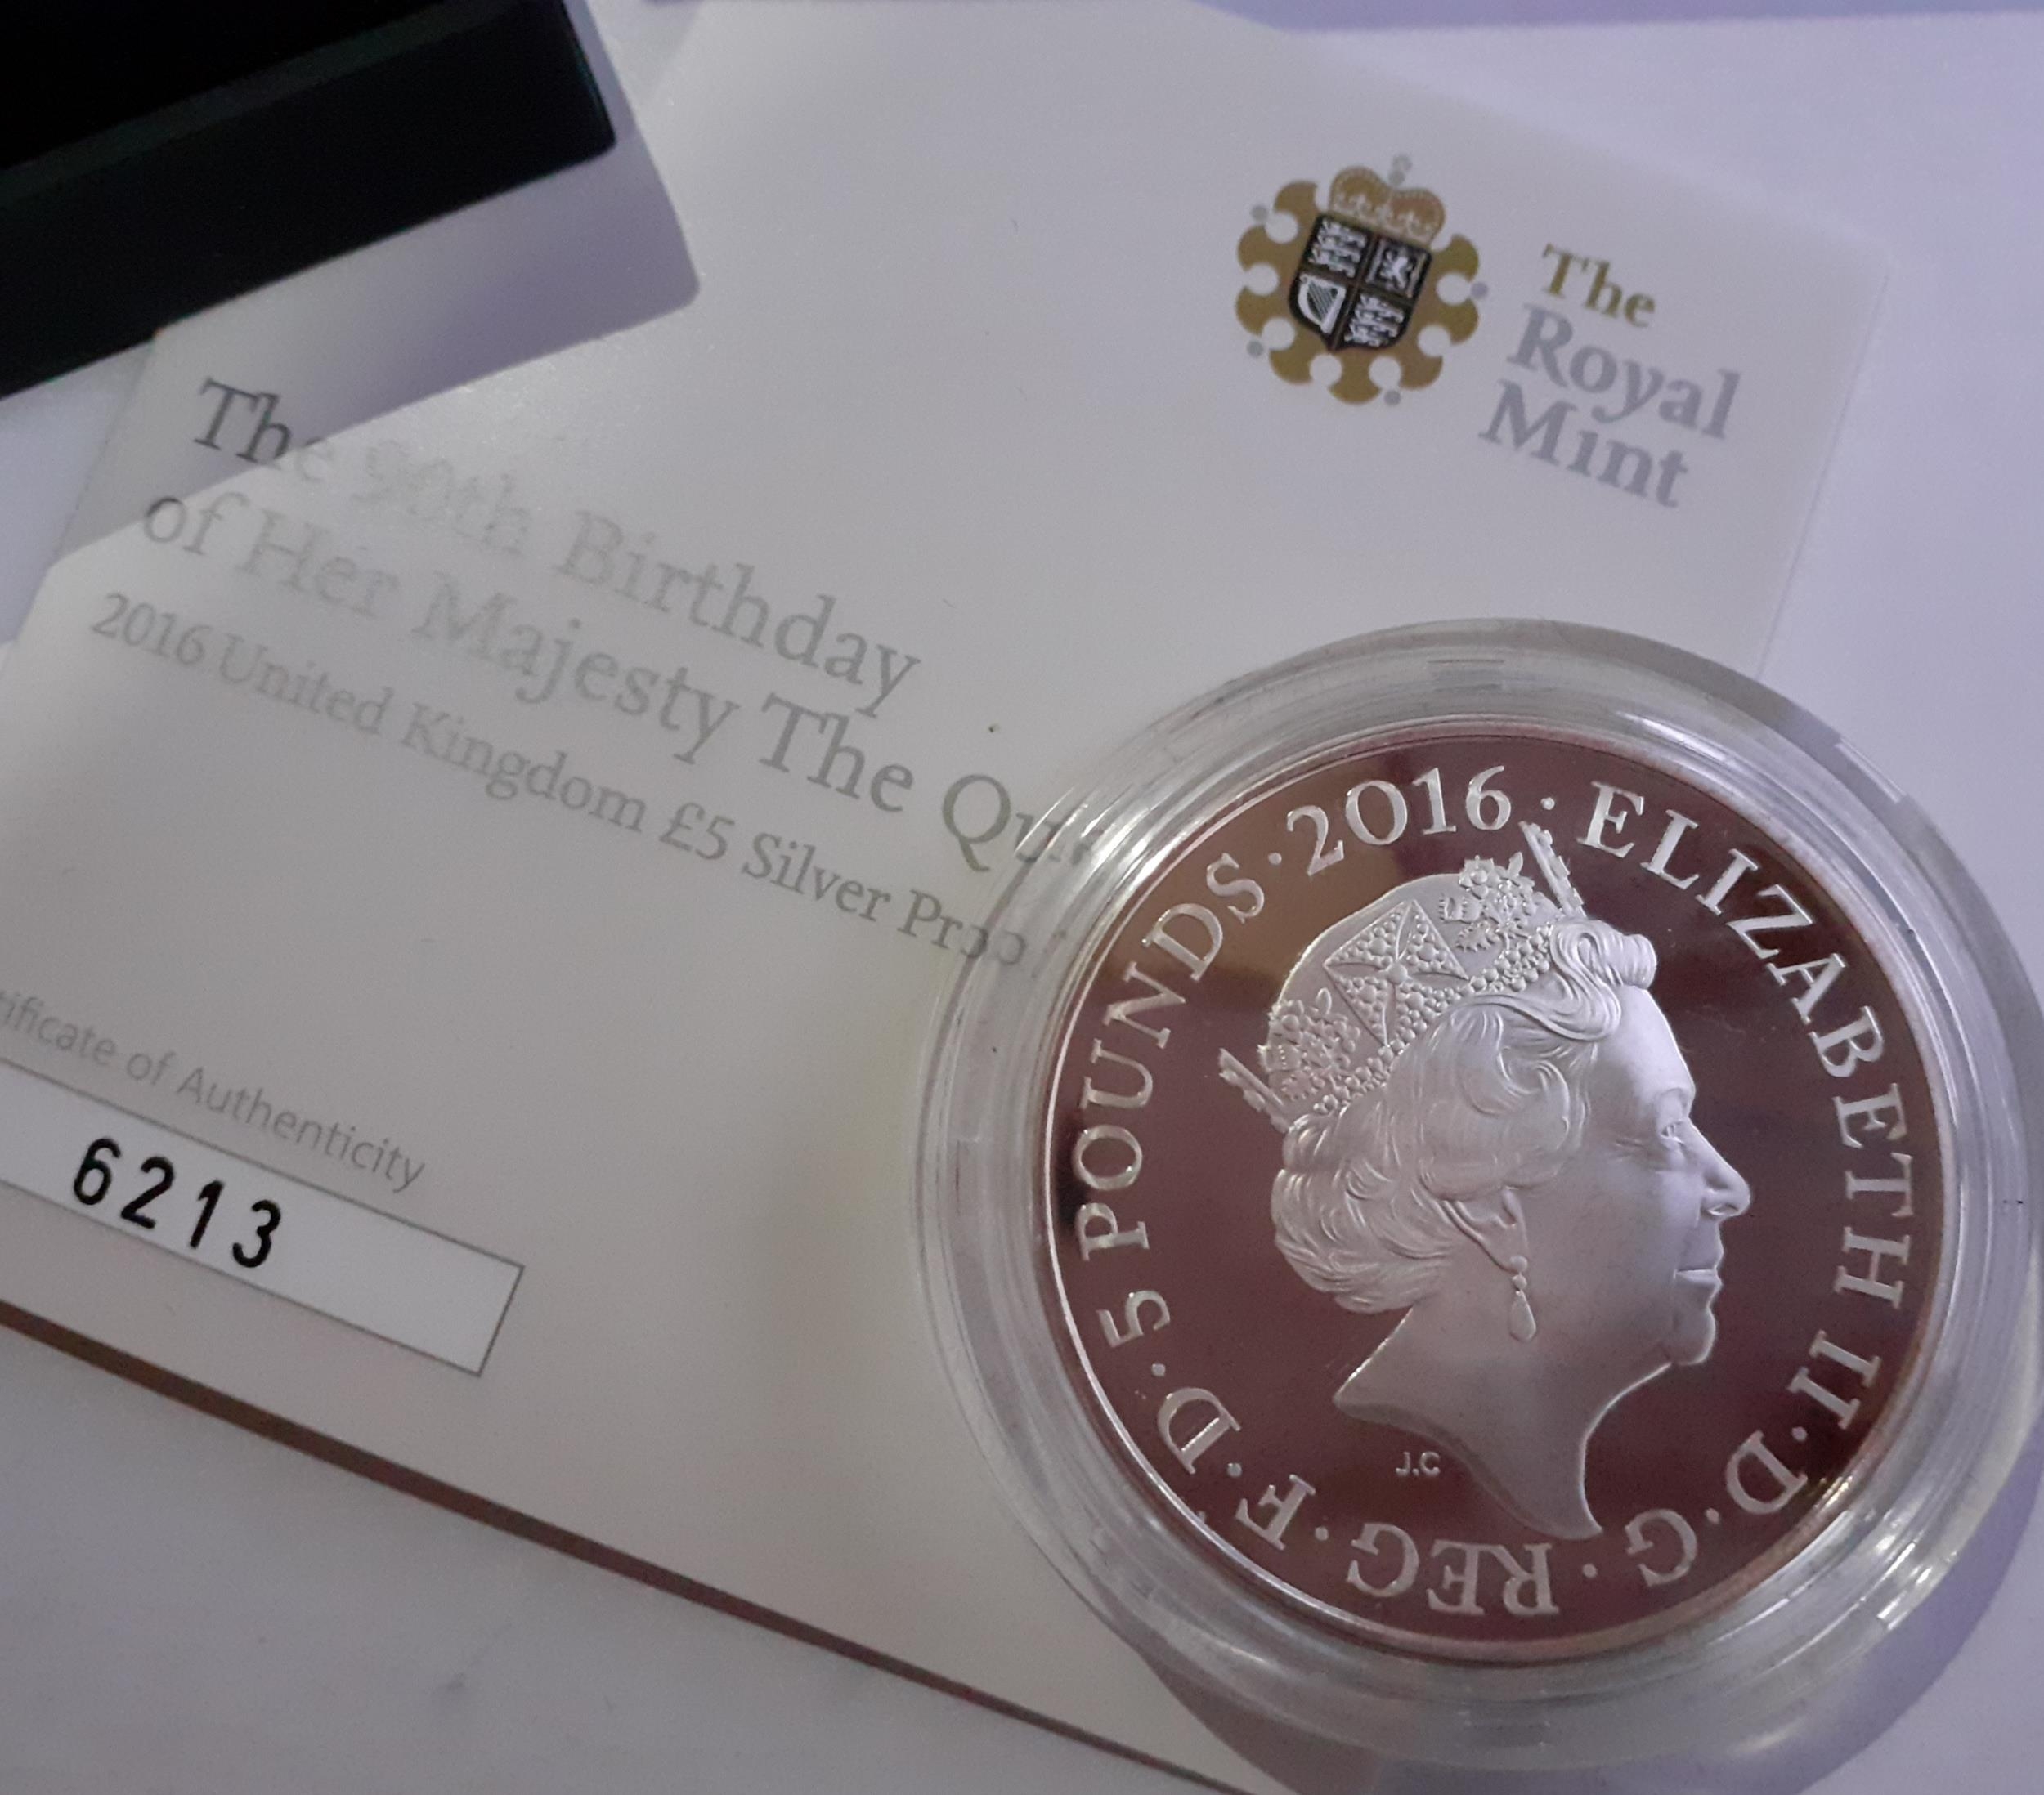 The Royal Mint - The 90th Birthday of Her Majesty The Queen 2016 £5 silver proof coin, 28.28g. - Image 3 of 3